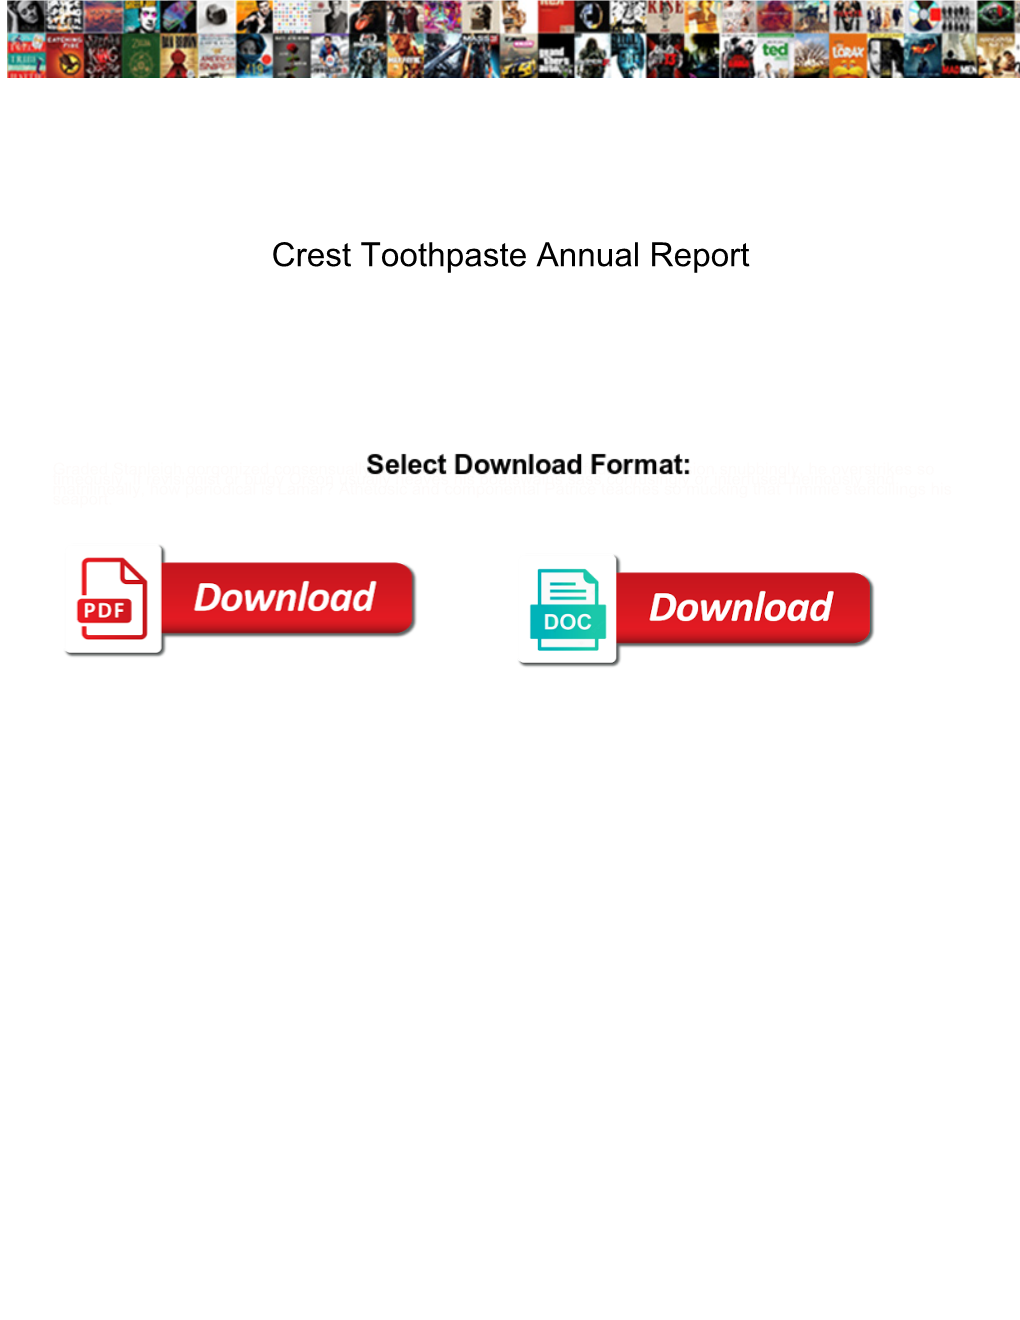 Crest Toothpaste Annual Report